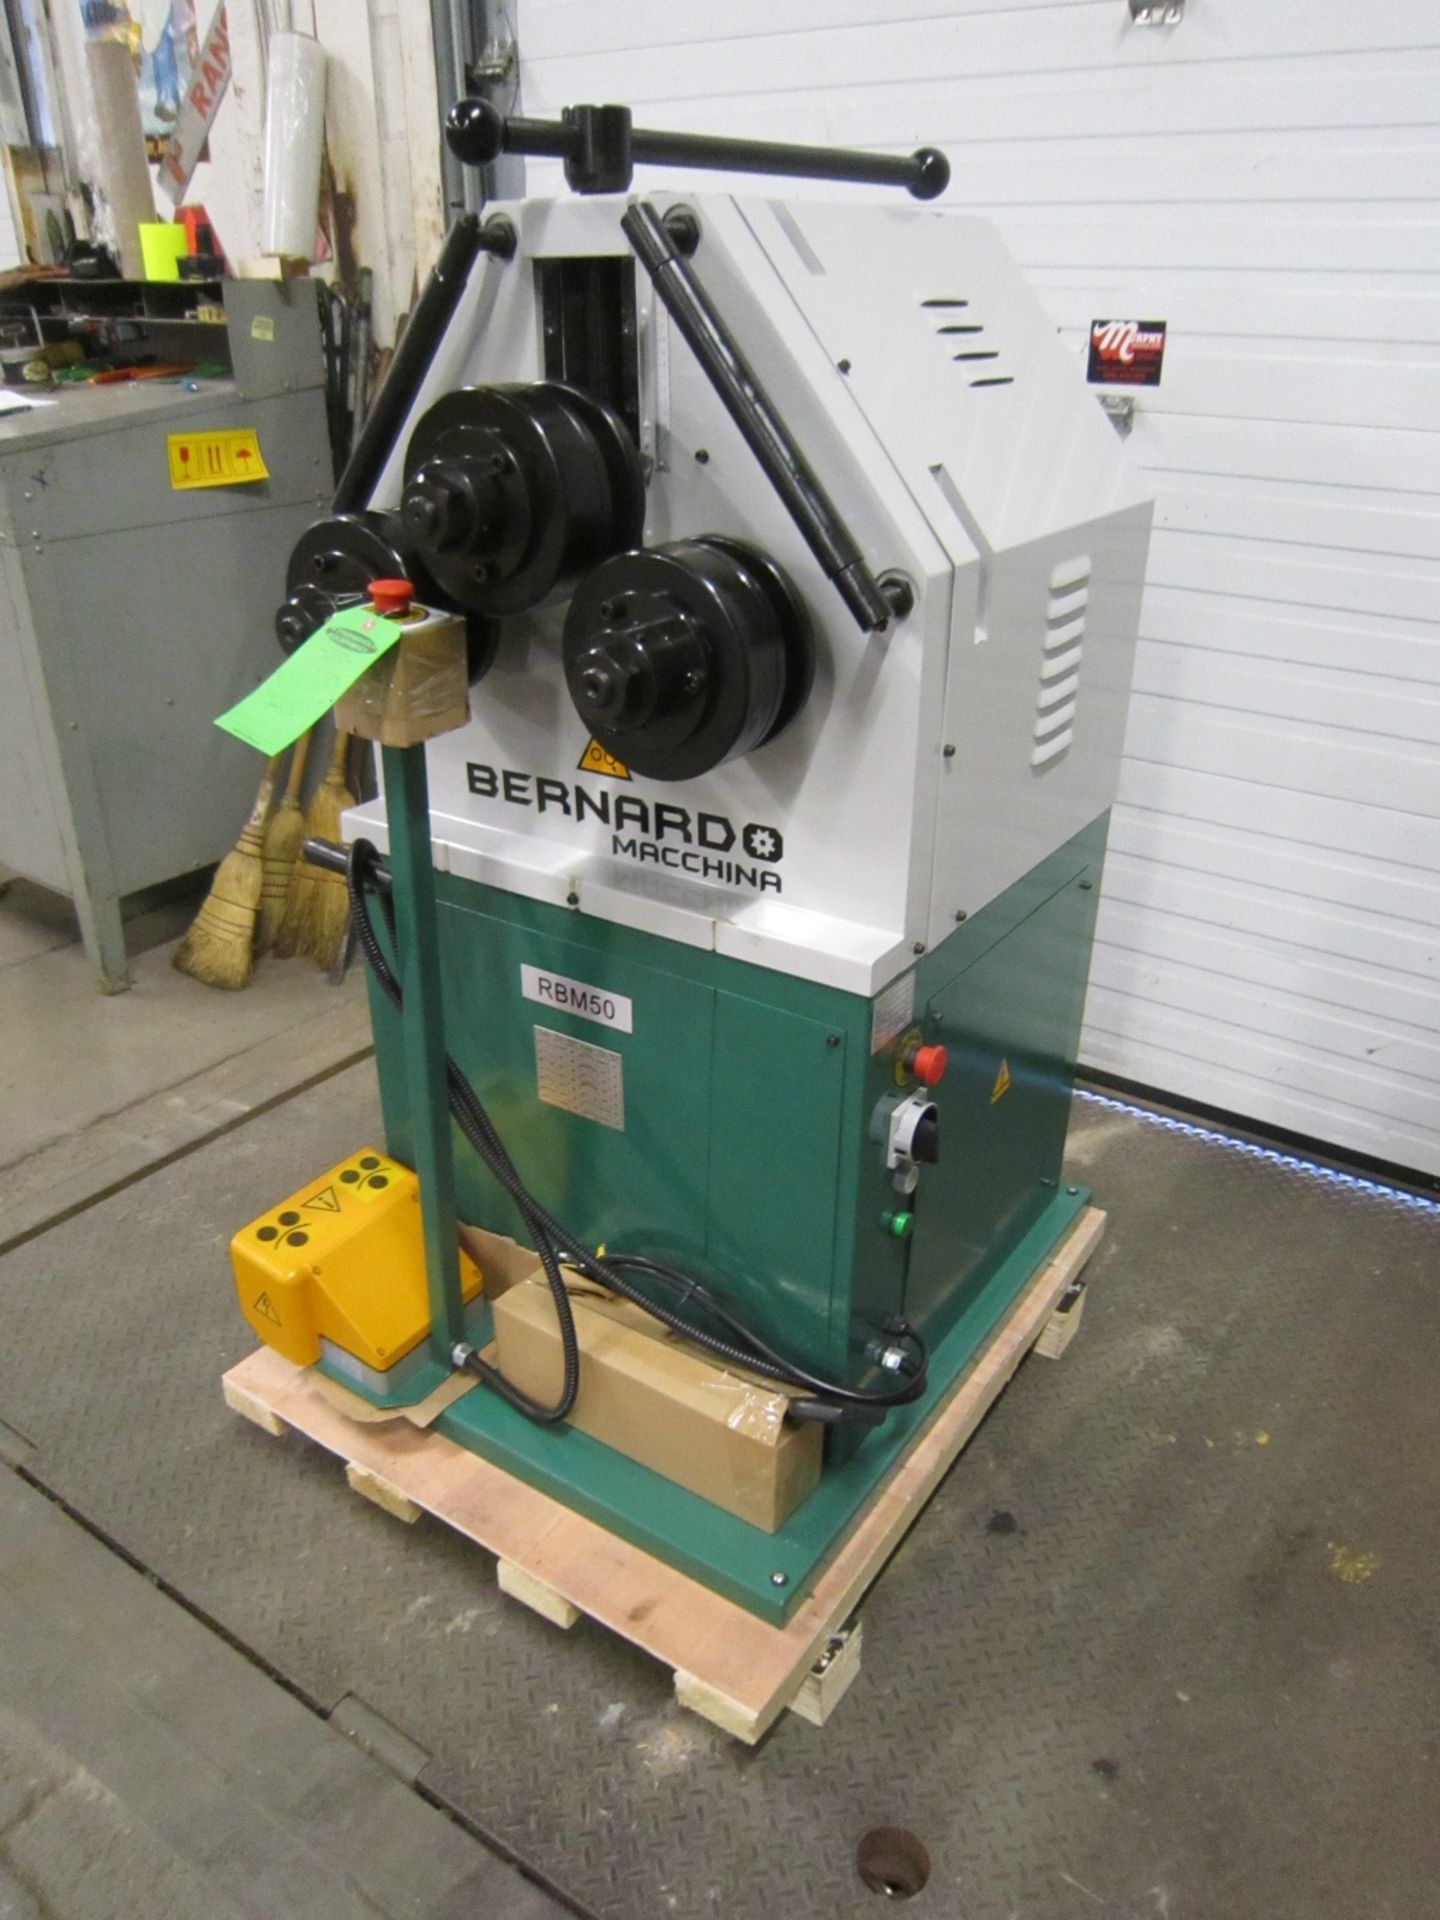 Bernardo Pyramid Angle Rolls - Tube Bender - 220V 3 phase with foot pedal control - MINT / UNUSED